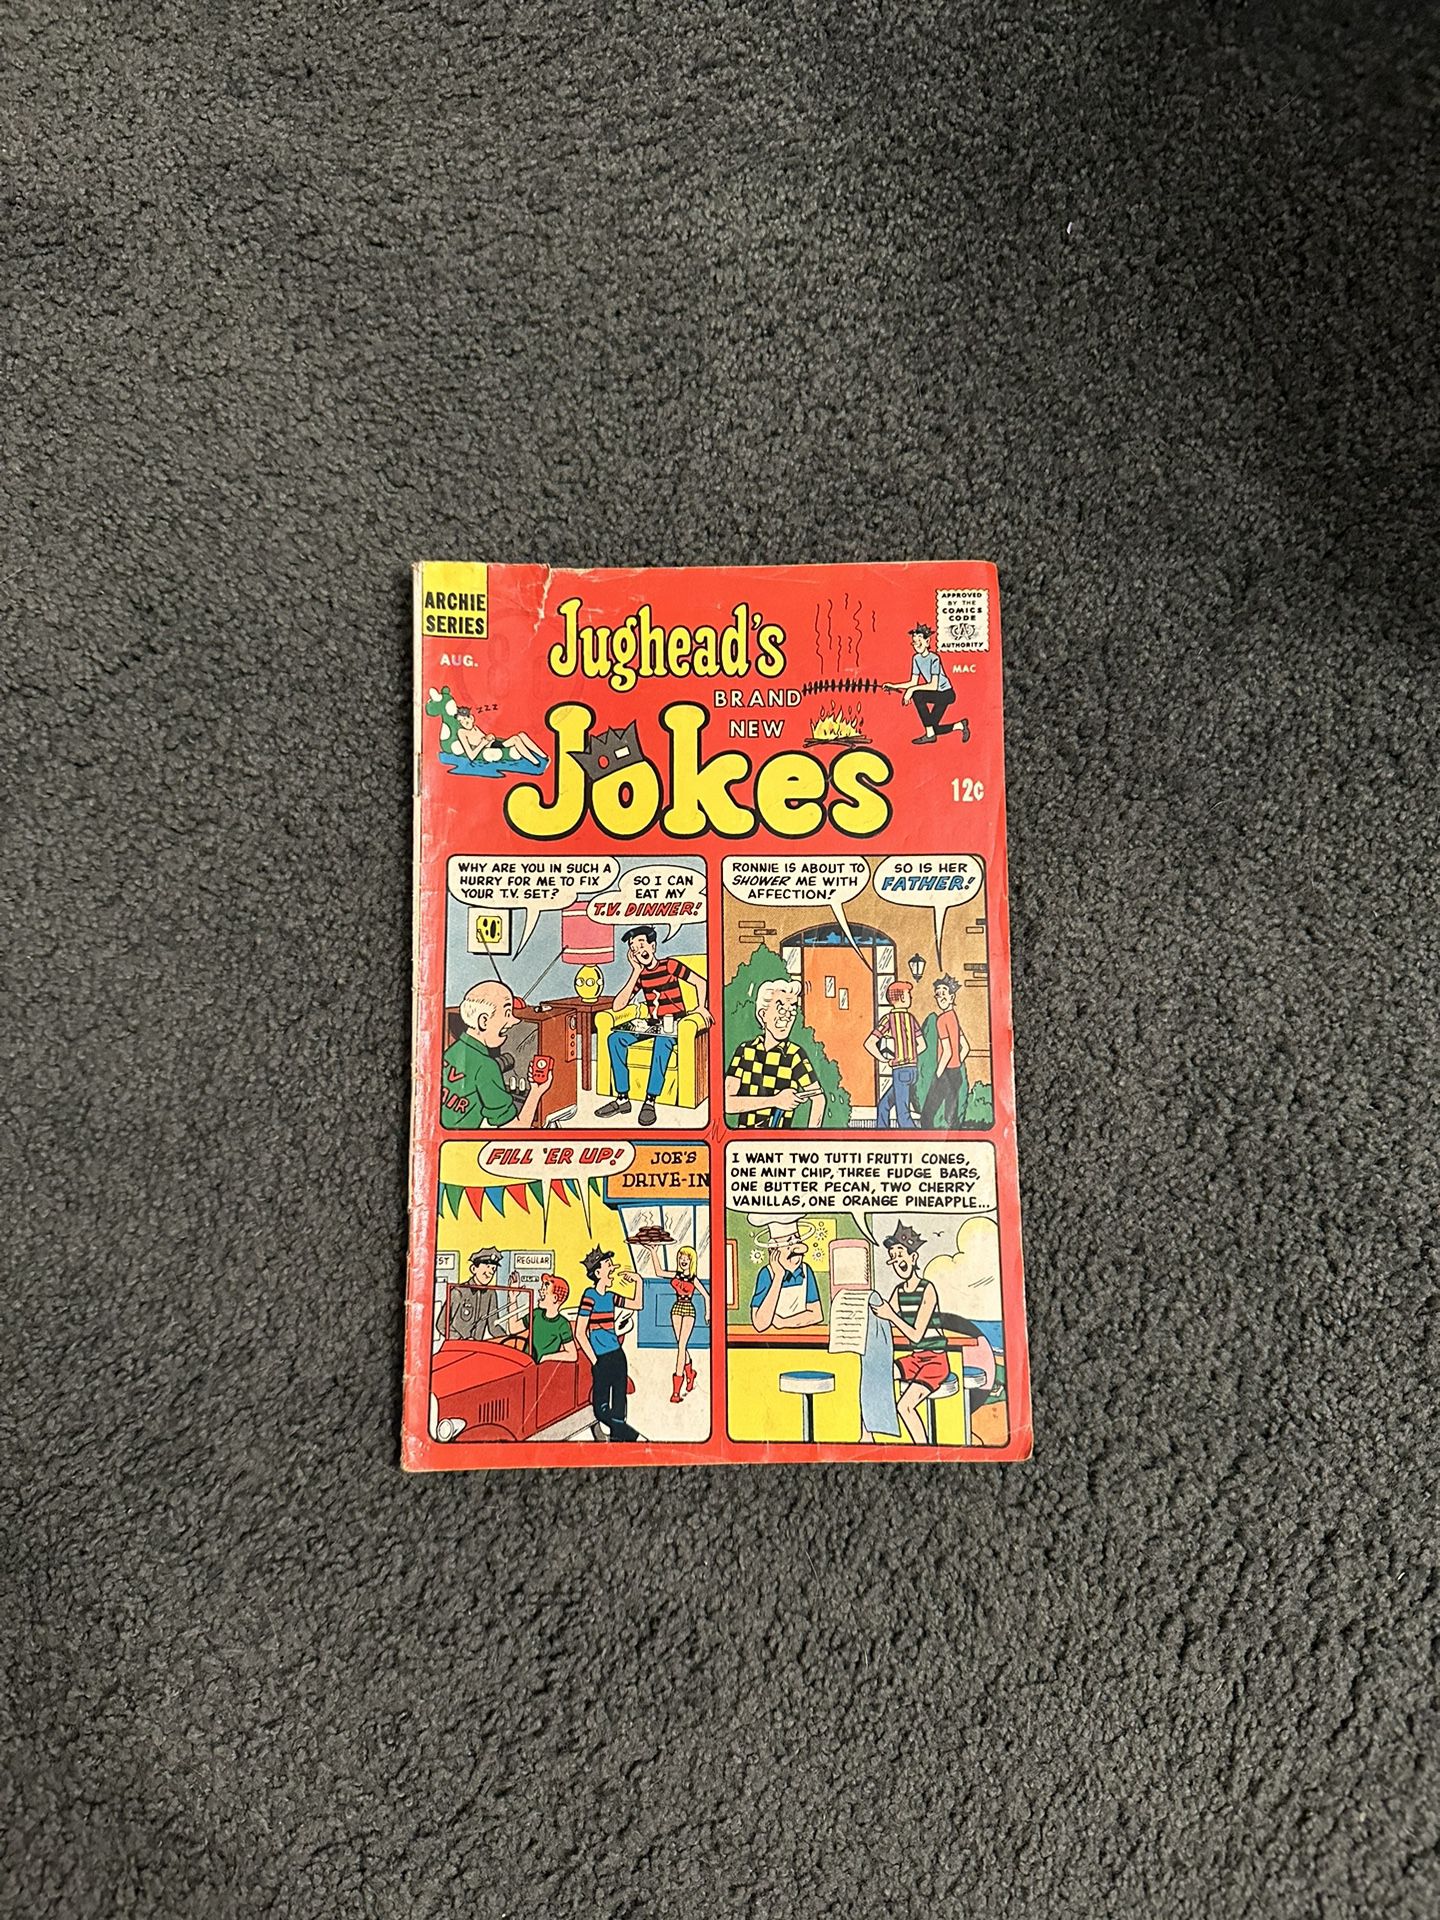 Jughead's "Brand New" Jokes Silver Age Comic First Issue 1967 Archie Comics